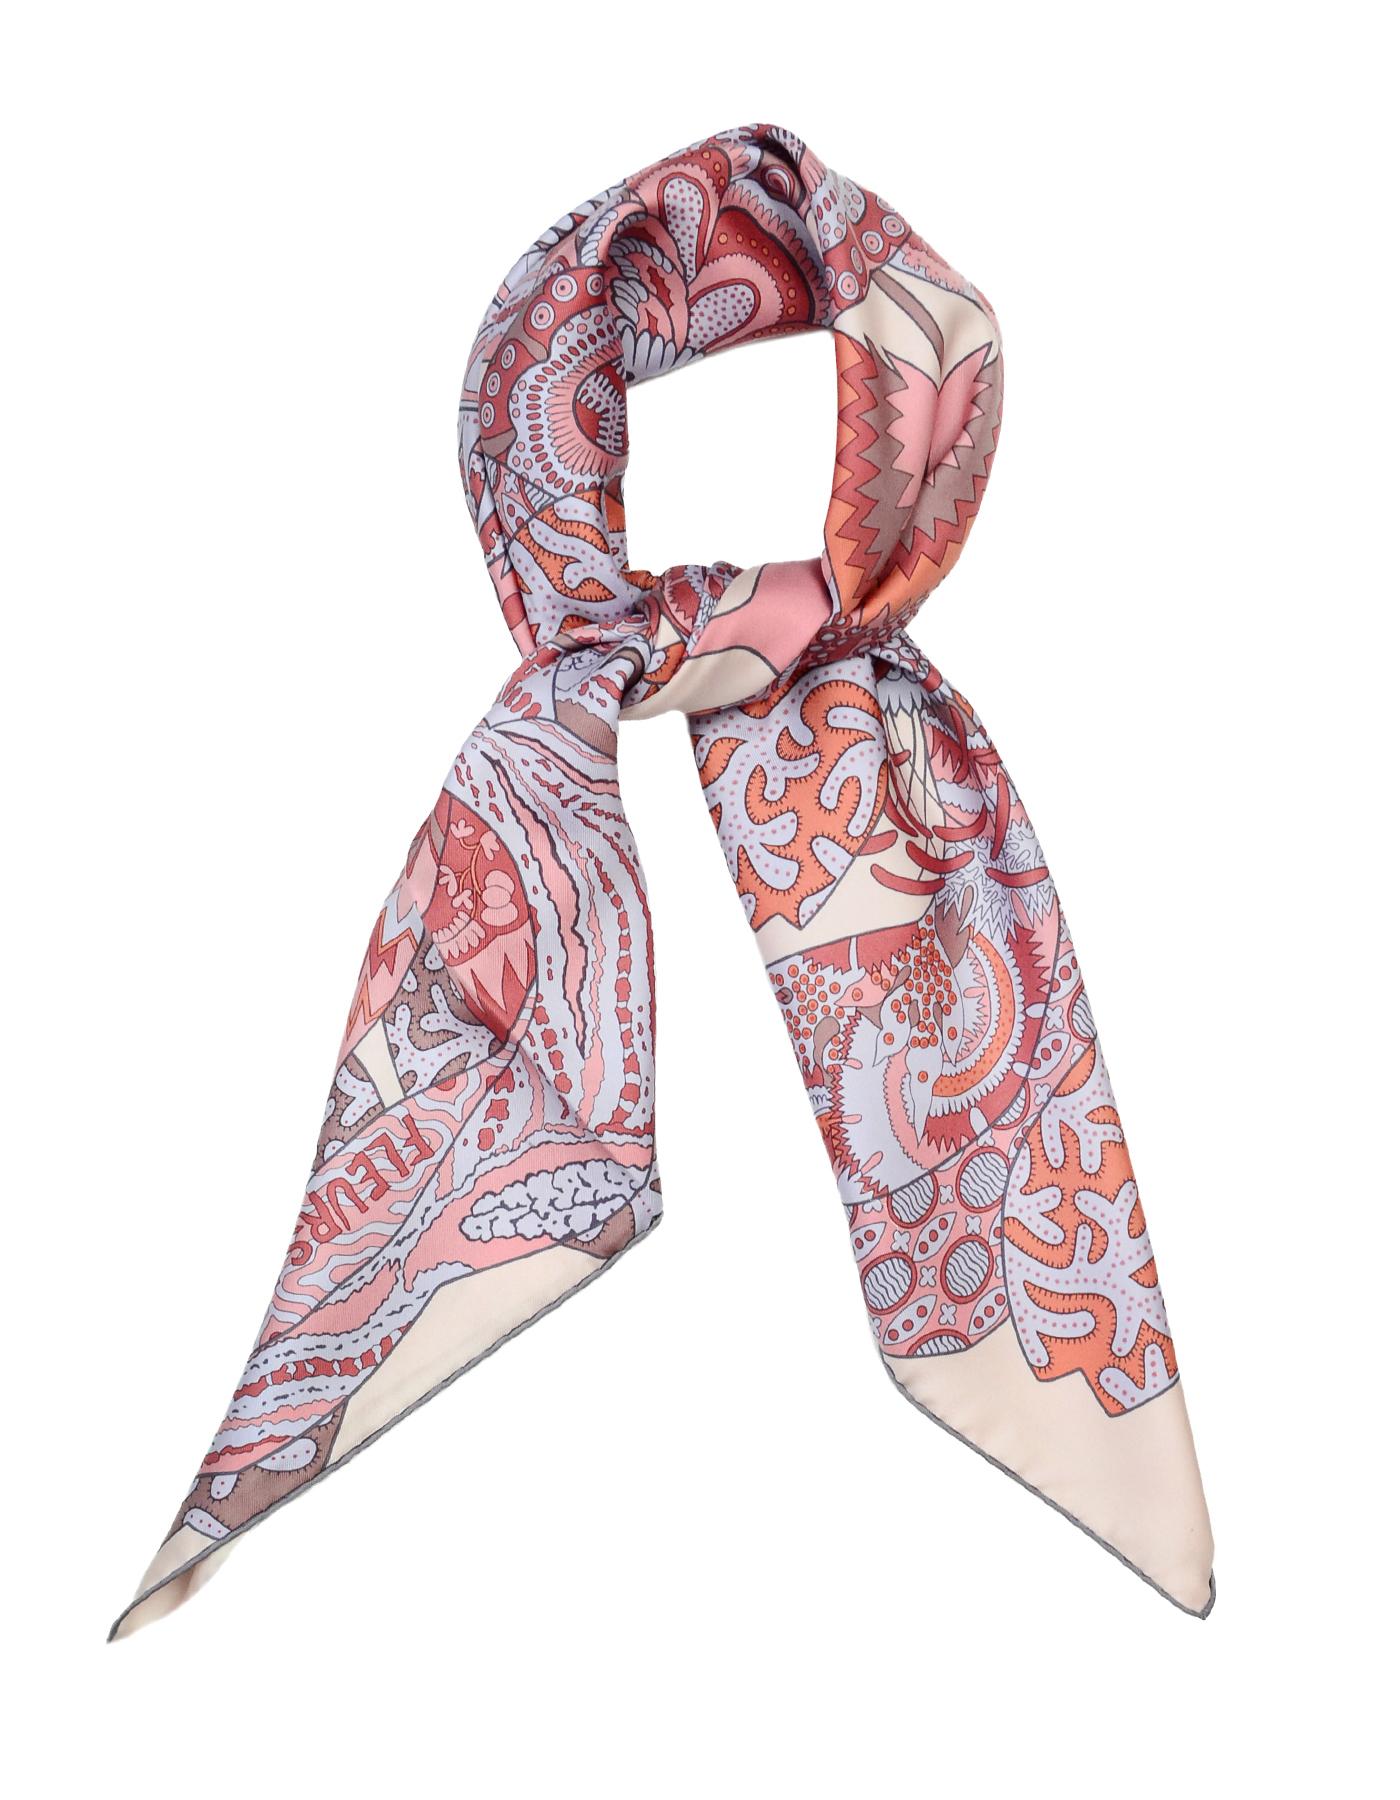 Hermes Light Pink/Lavender/Burgundy Fleurs D'Indiennes 90cm Silk Scarf In Box

Made In:  France
Color: Light pink, lavender, burgundy 
Materials: 100% silk
Overall Condition: Excellent condition, in original box 
Estimated Retail: $395 +